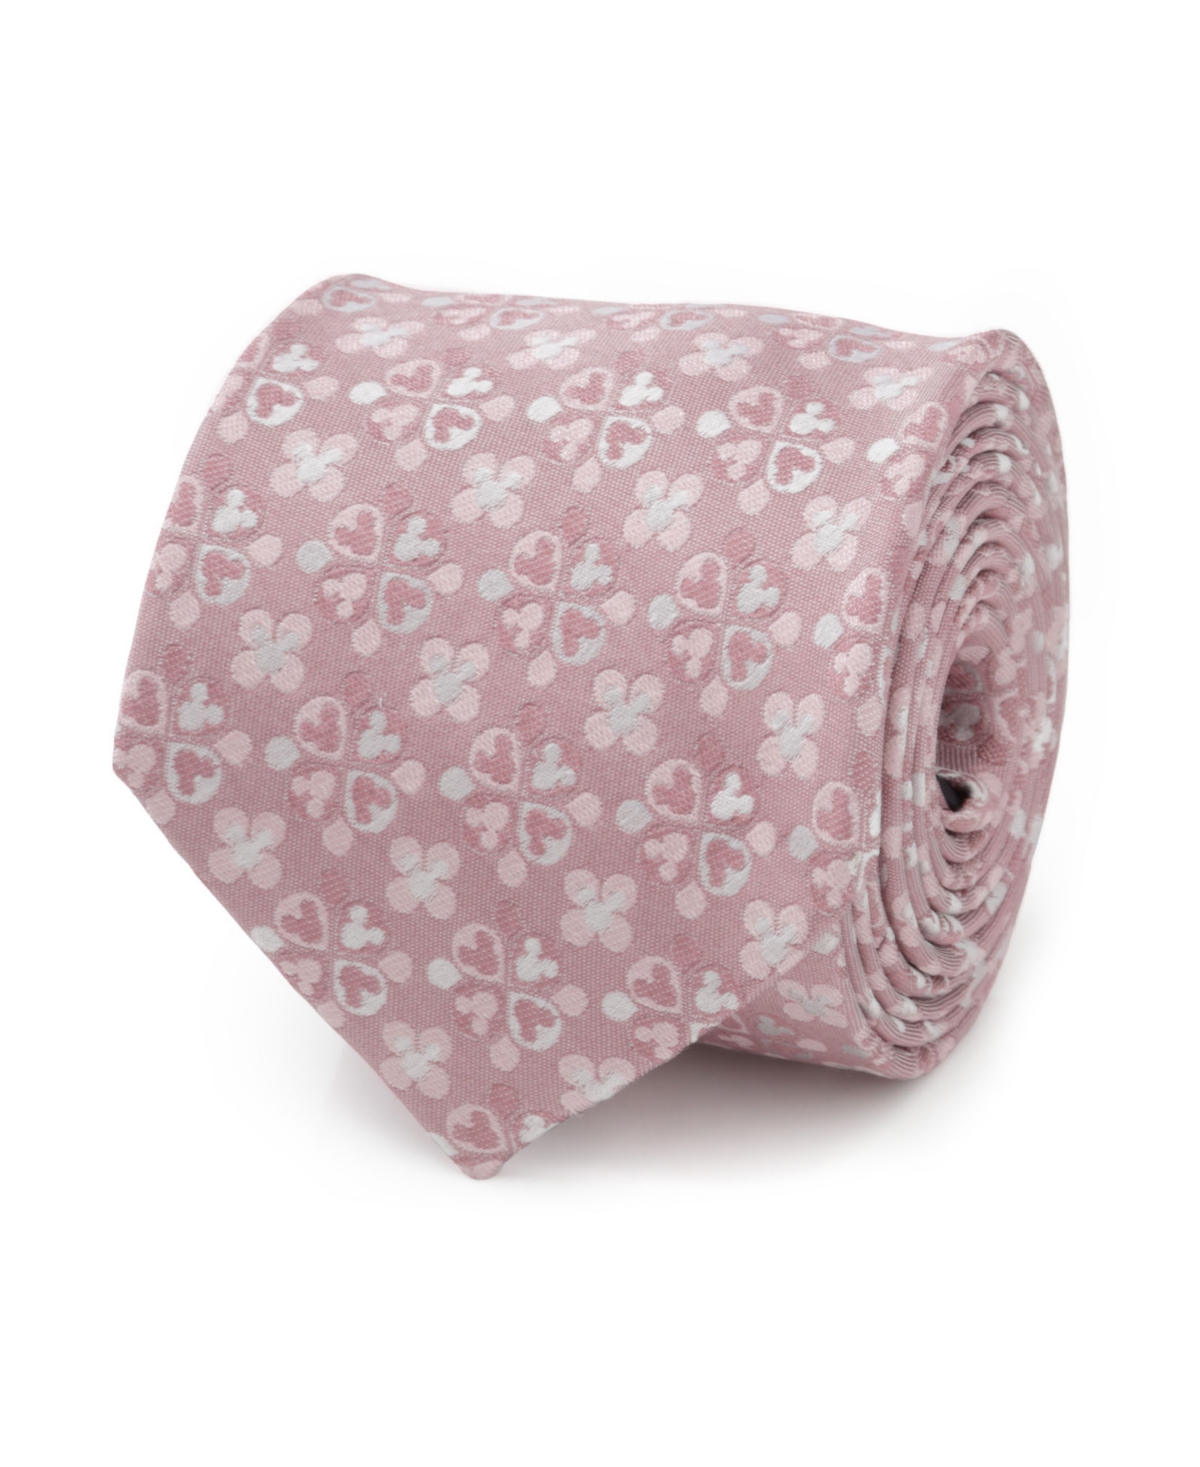 Men's Mickey Mouse Silhouette Blossom Tie - Pink